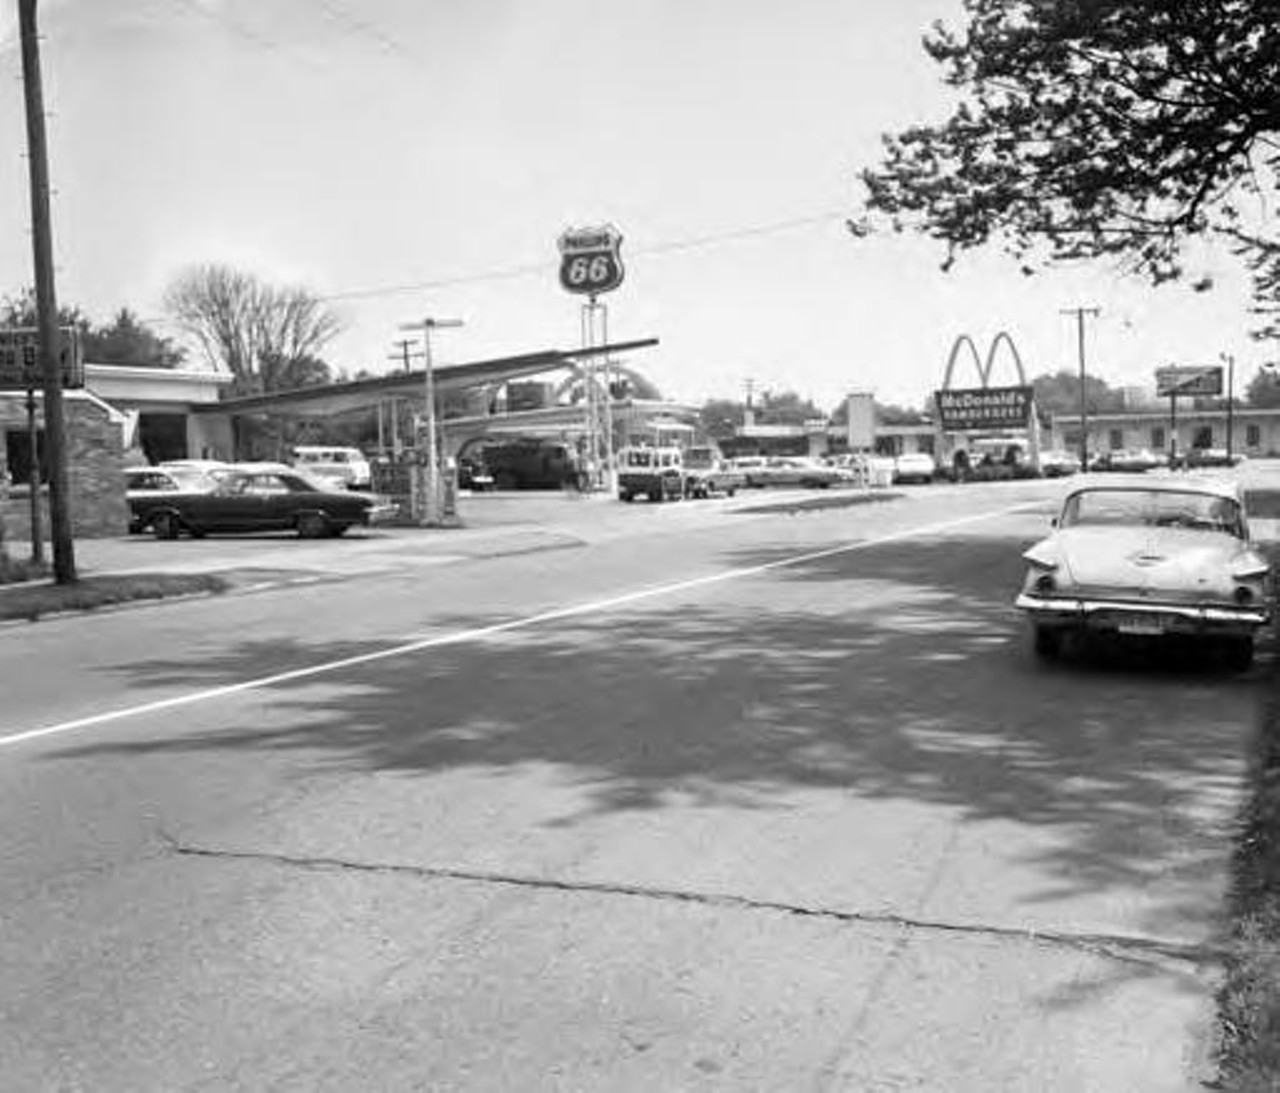 Looking east along Sloane from ParkRow Ave. Phillips 66 gasoline service station and the original MacDonald's drive-in restaurant can be seen of the north side. c. 1969